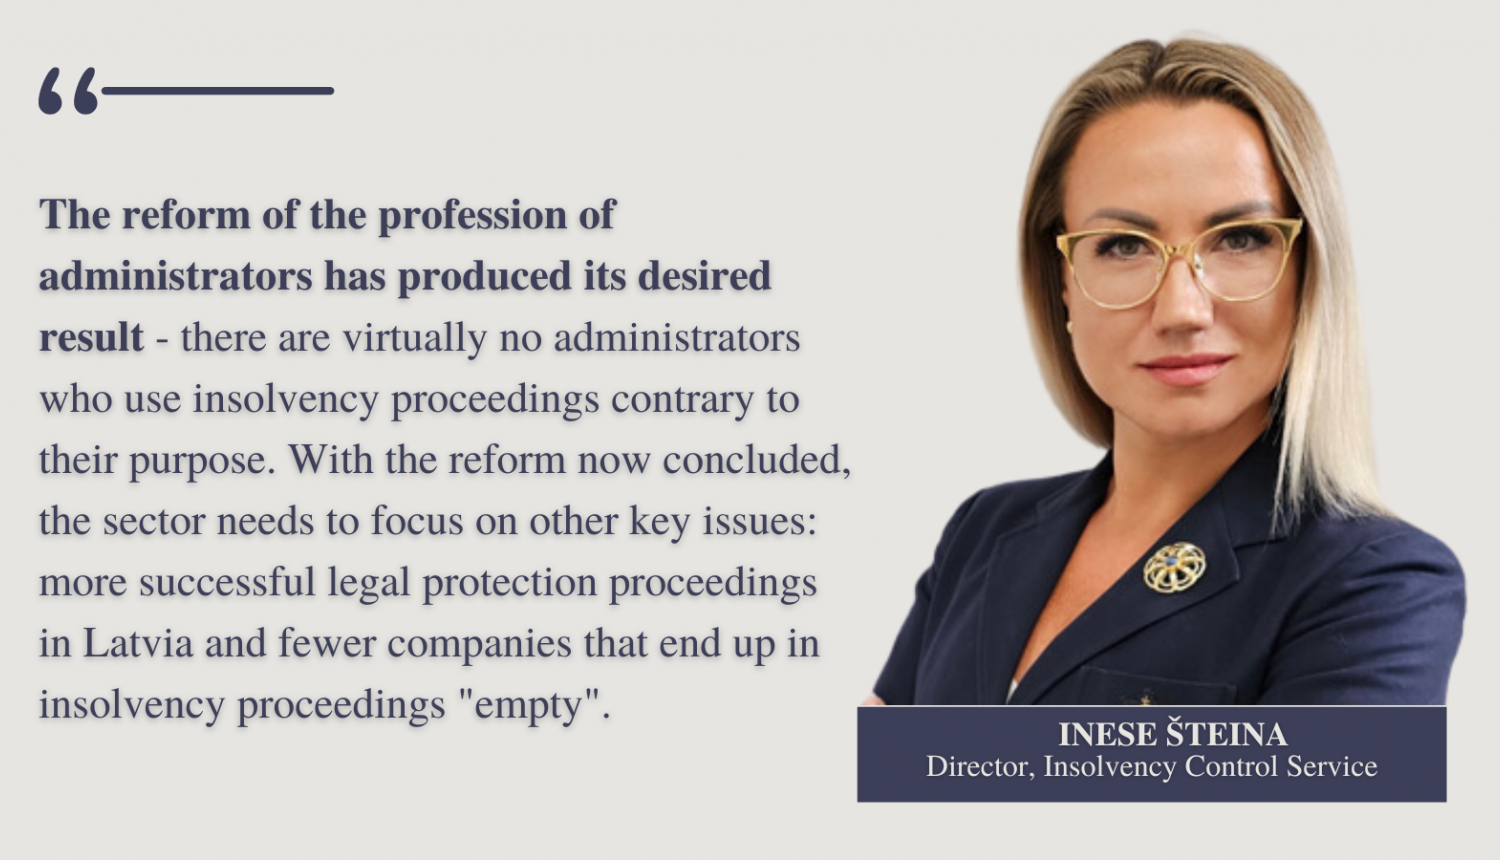 Inese Steina - director, Insolvency Control Service